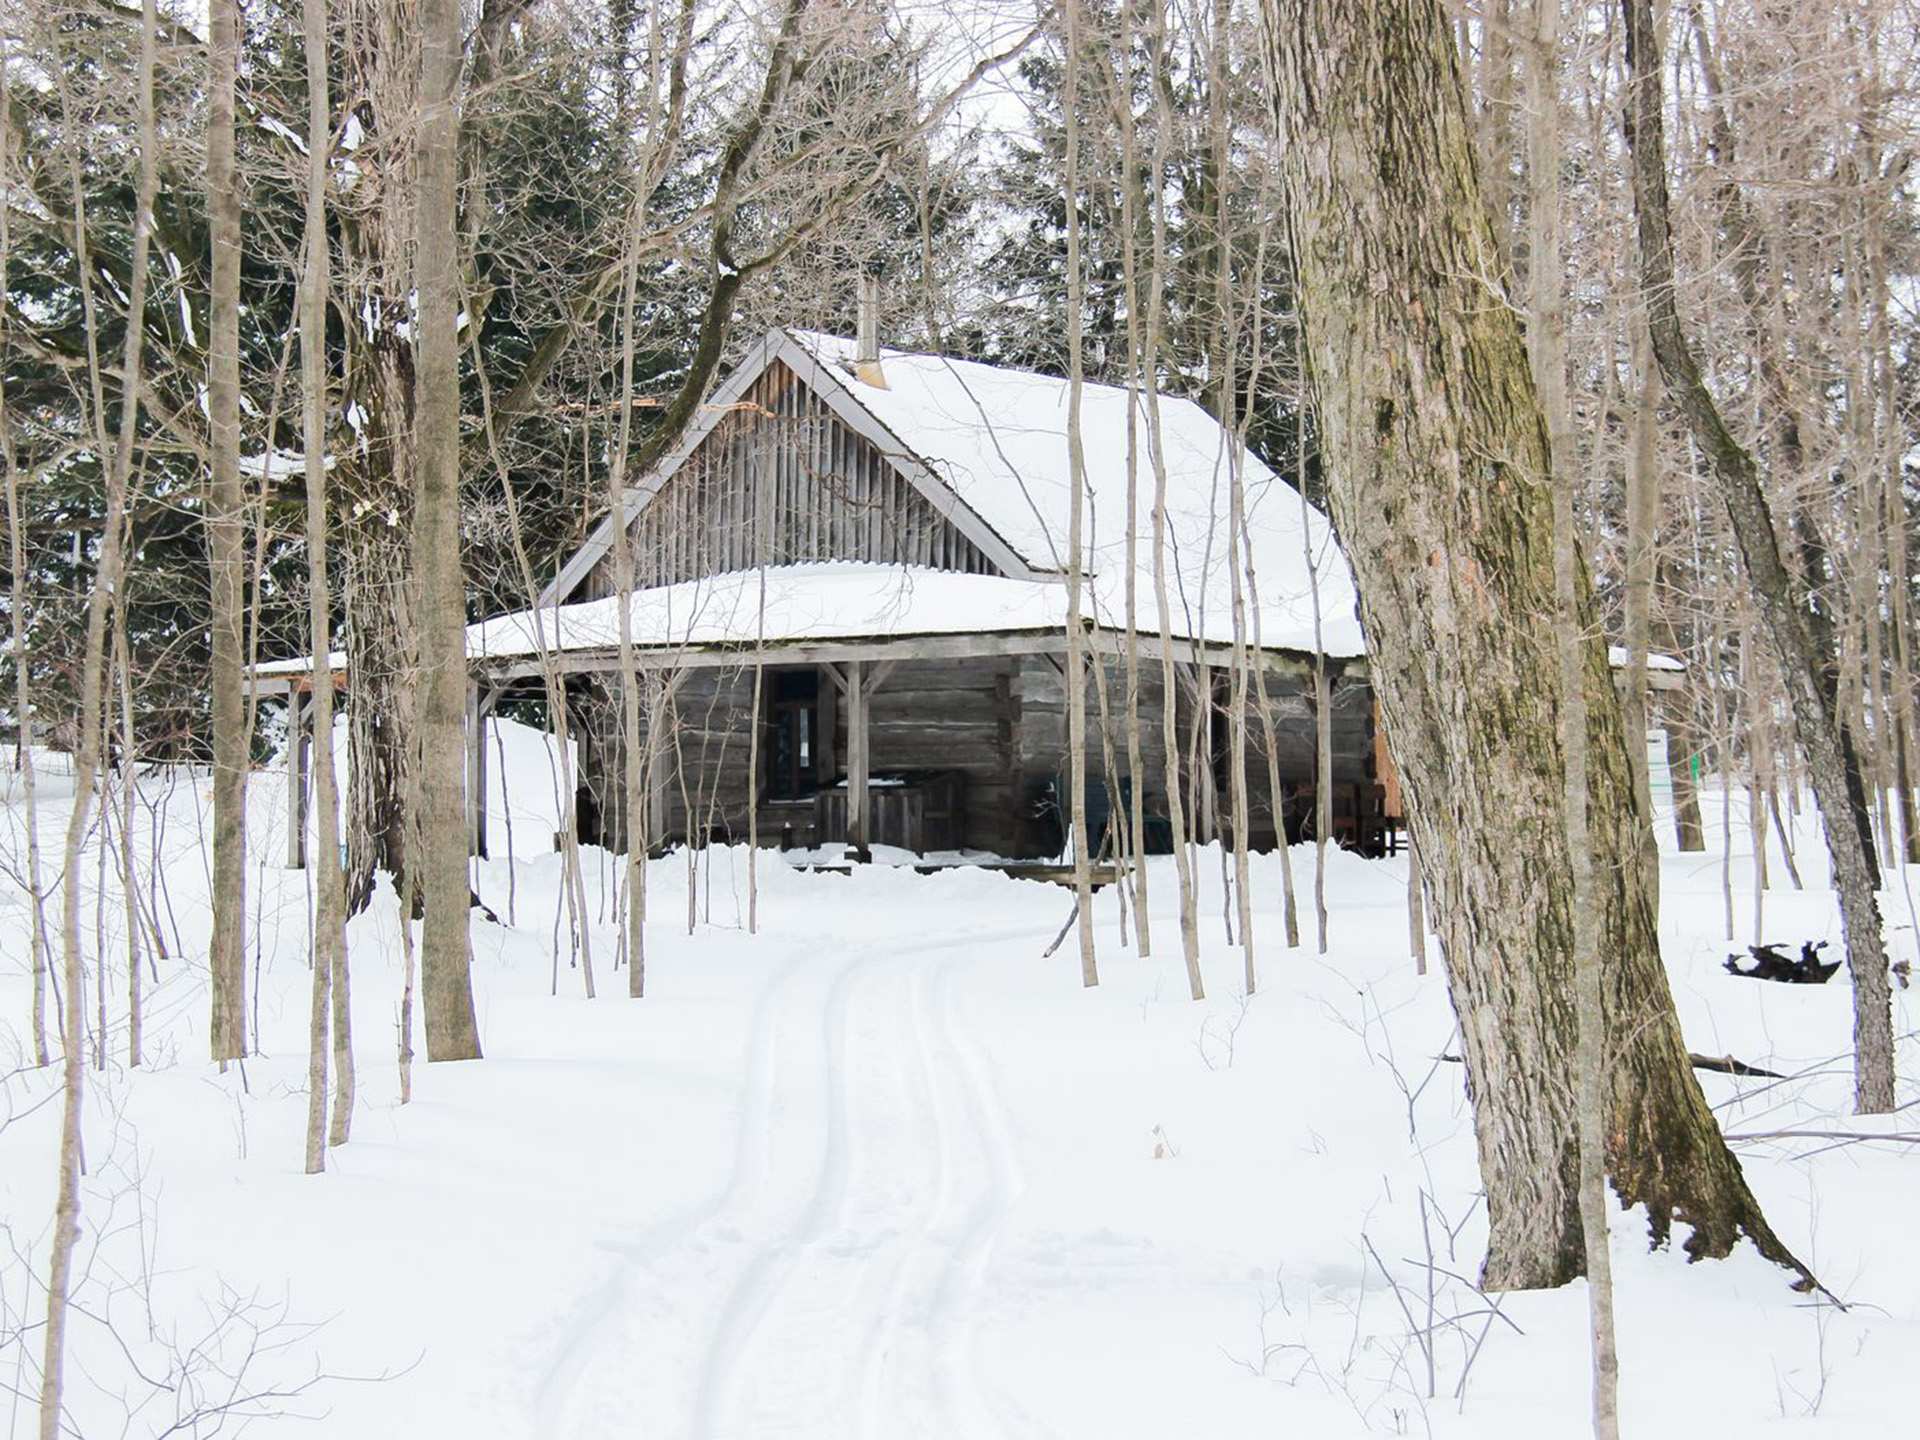 Rural Route Tour Co. maple syrup farm tour | Elliott Tree Farm's sugar shack in the snowy forest